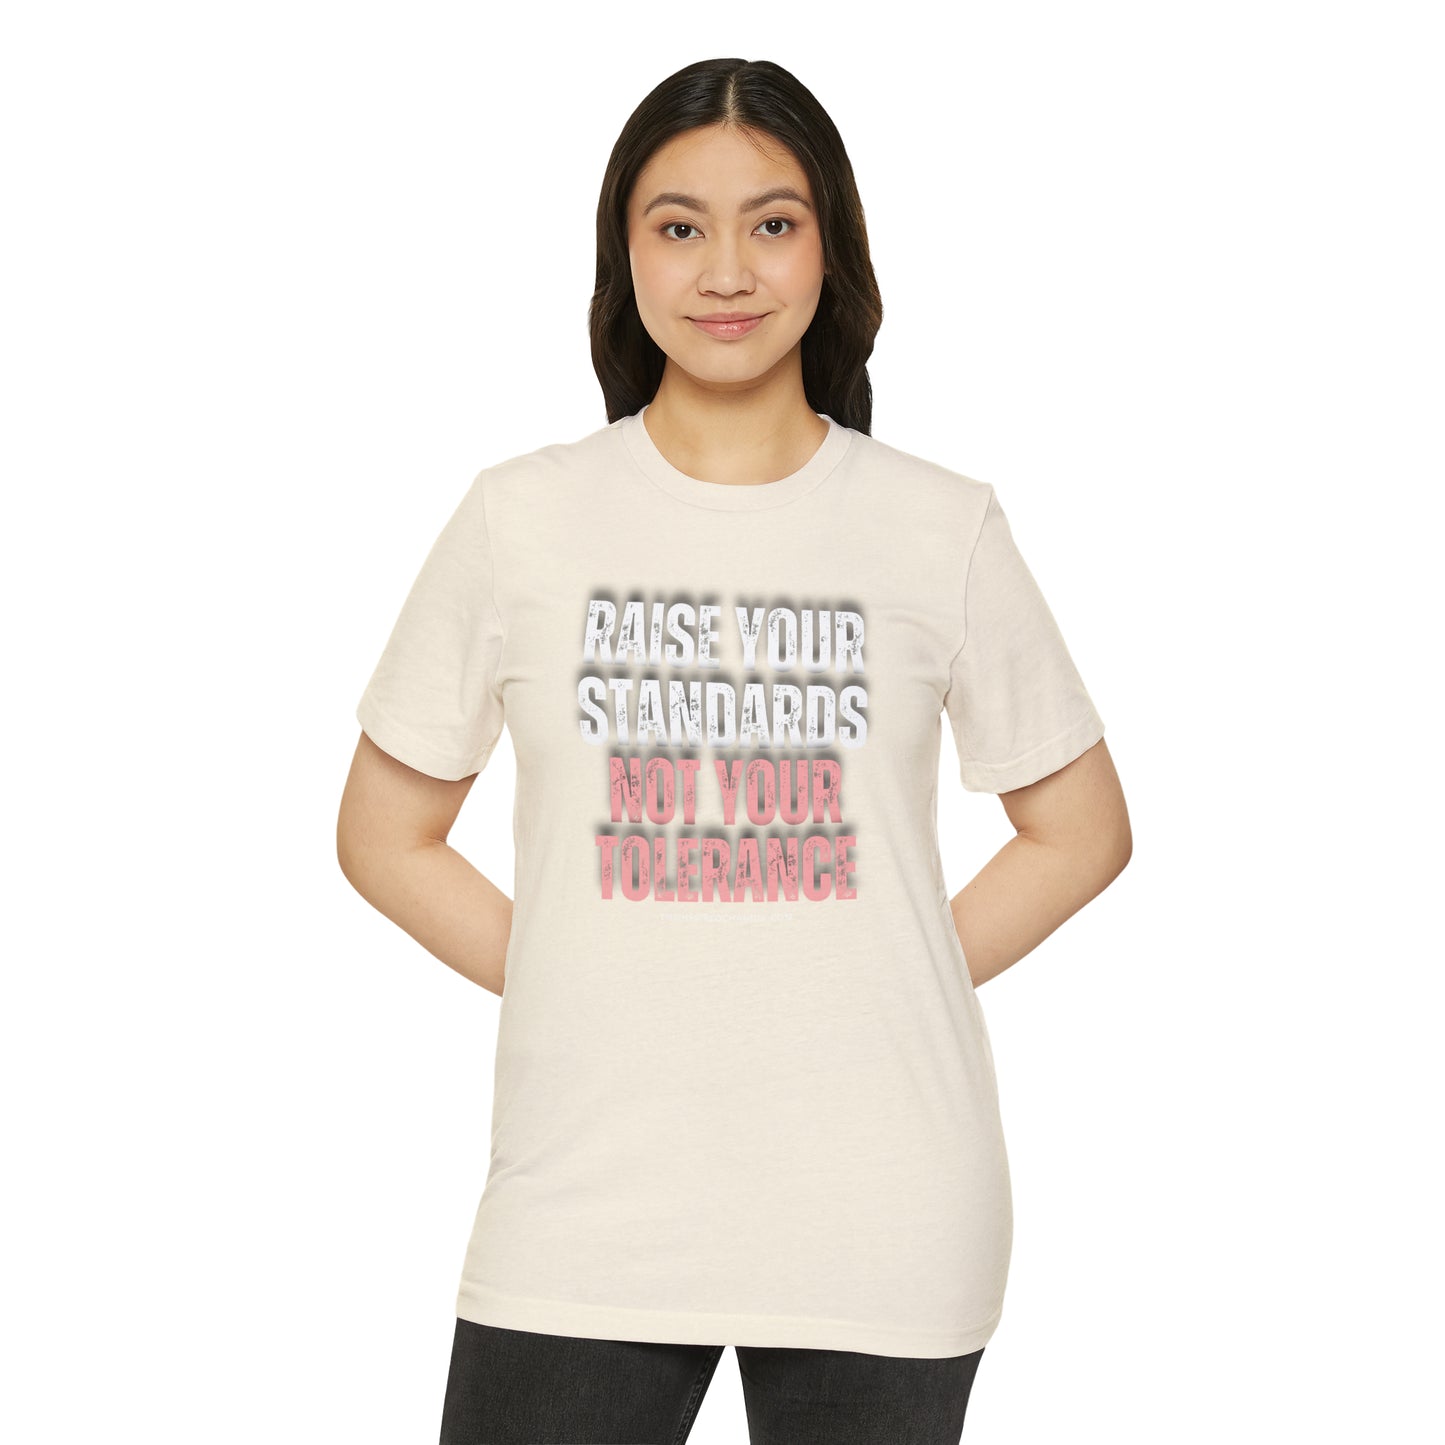 INSPIRED RAISE YOUR STANDARDS Unisex Recycled ORGANIC T-Shirt